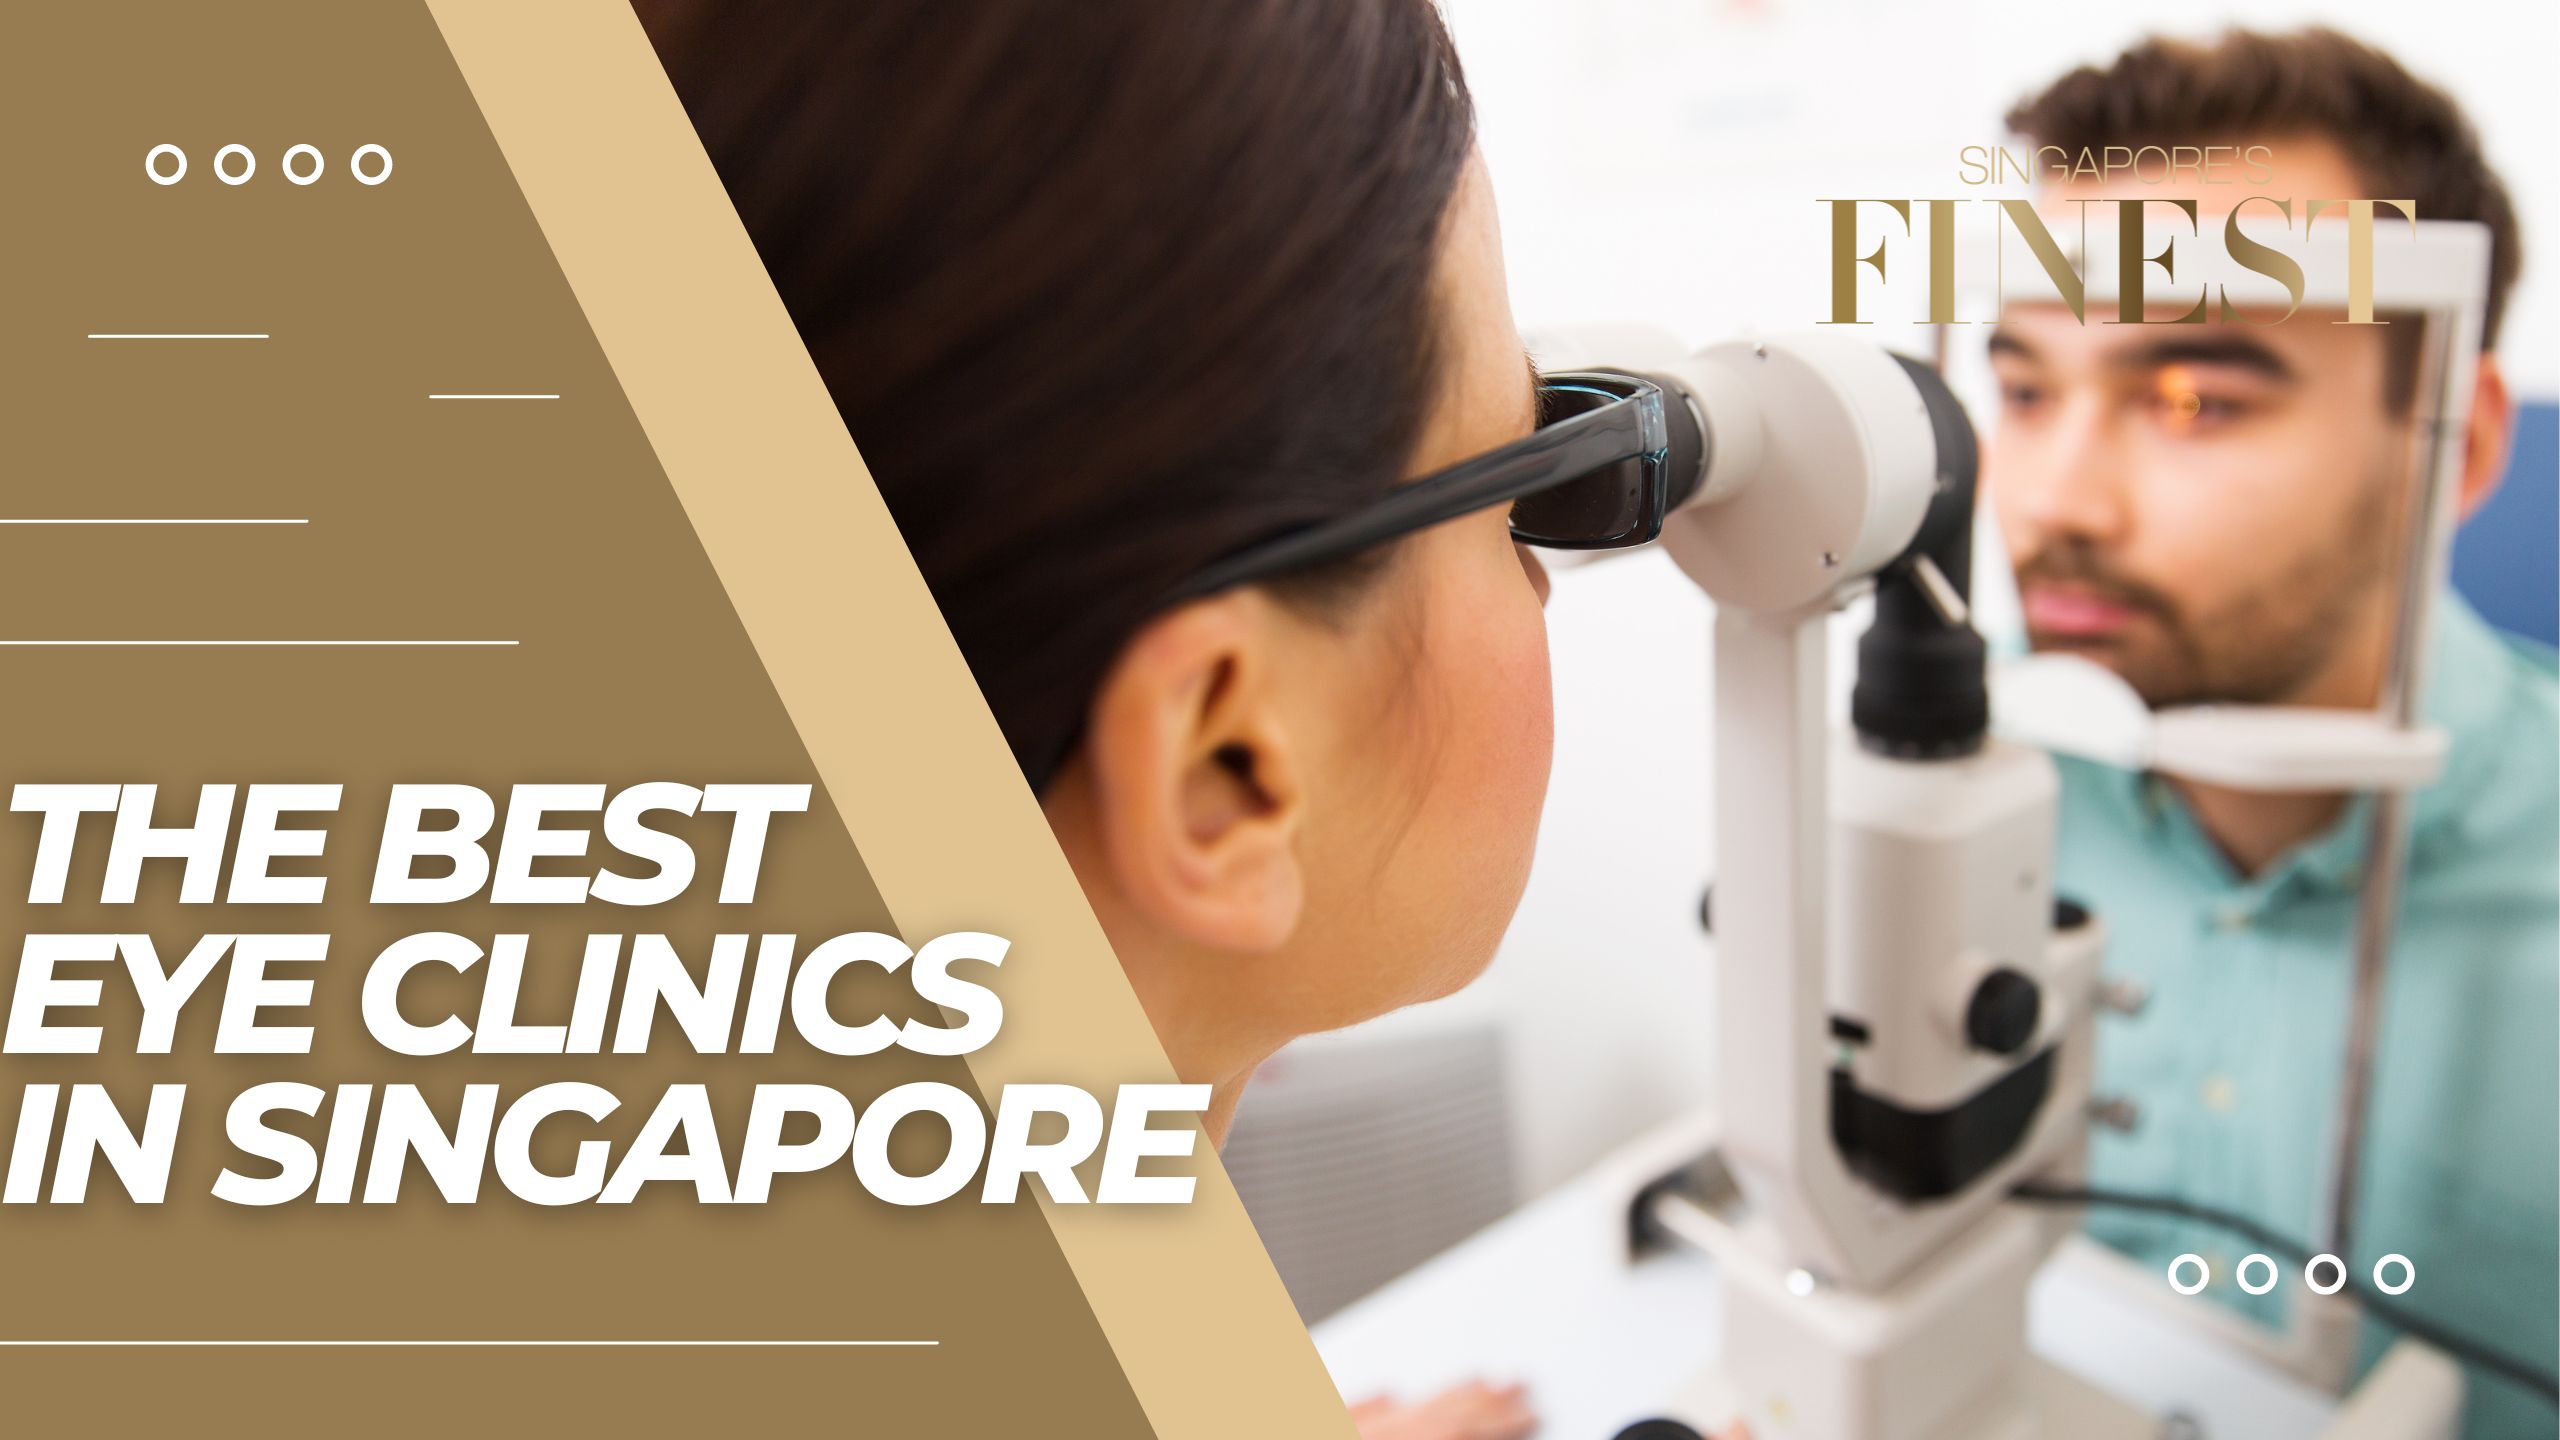 The Finest Eye Clinics in Singapore